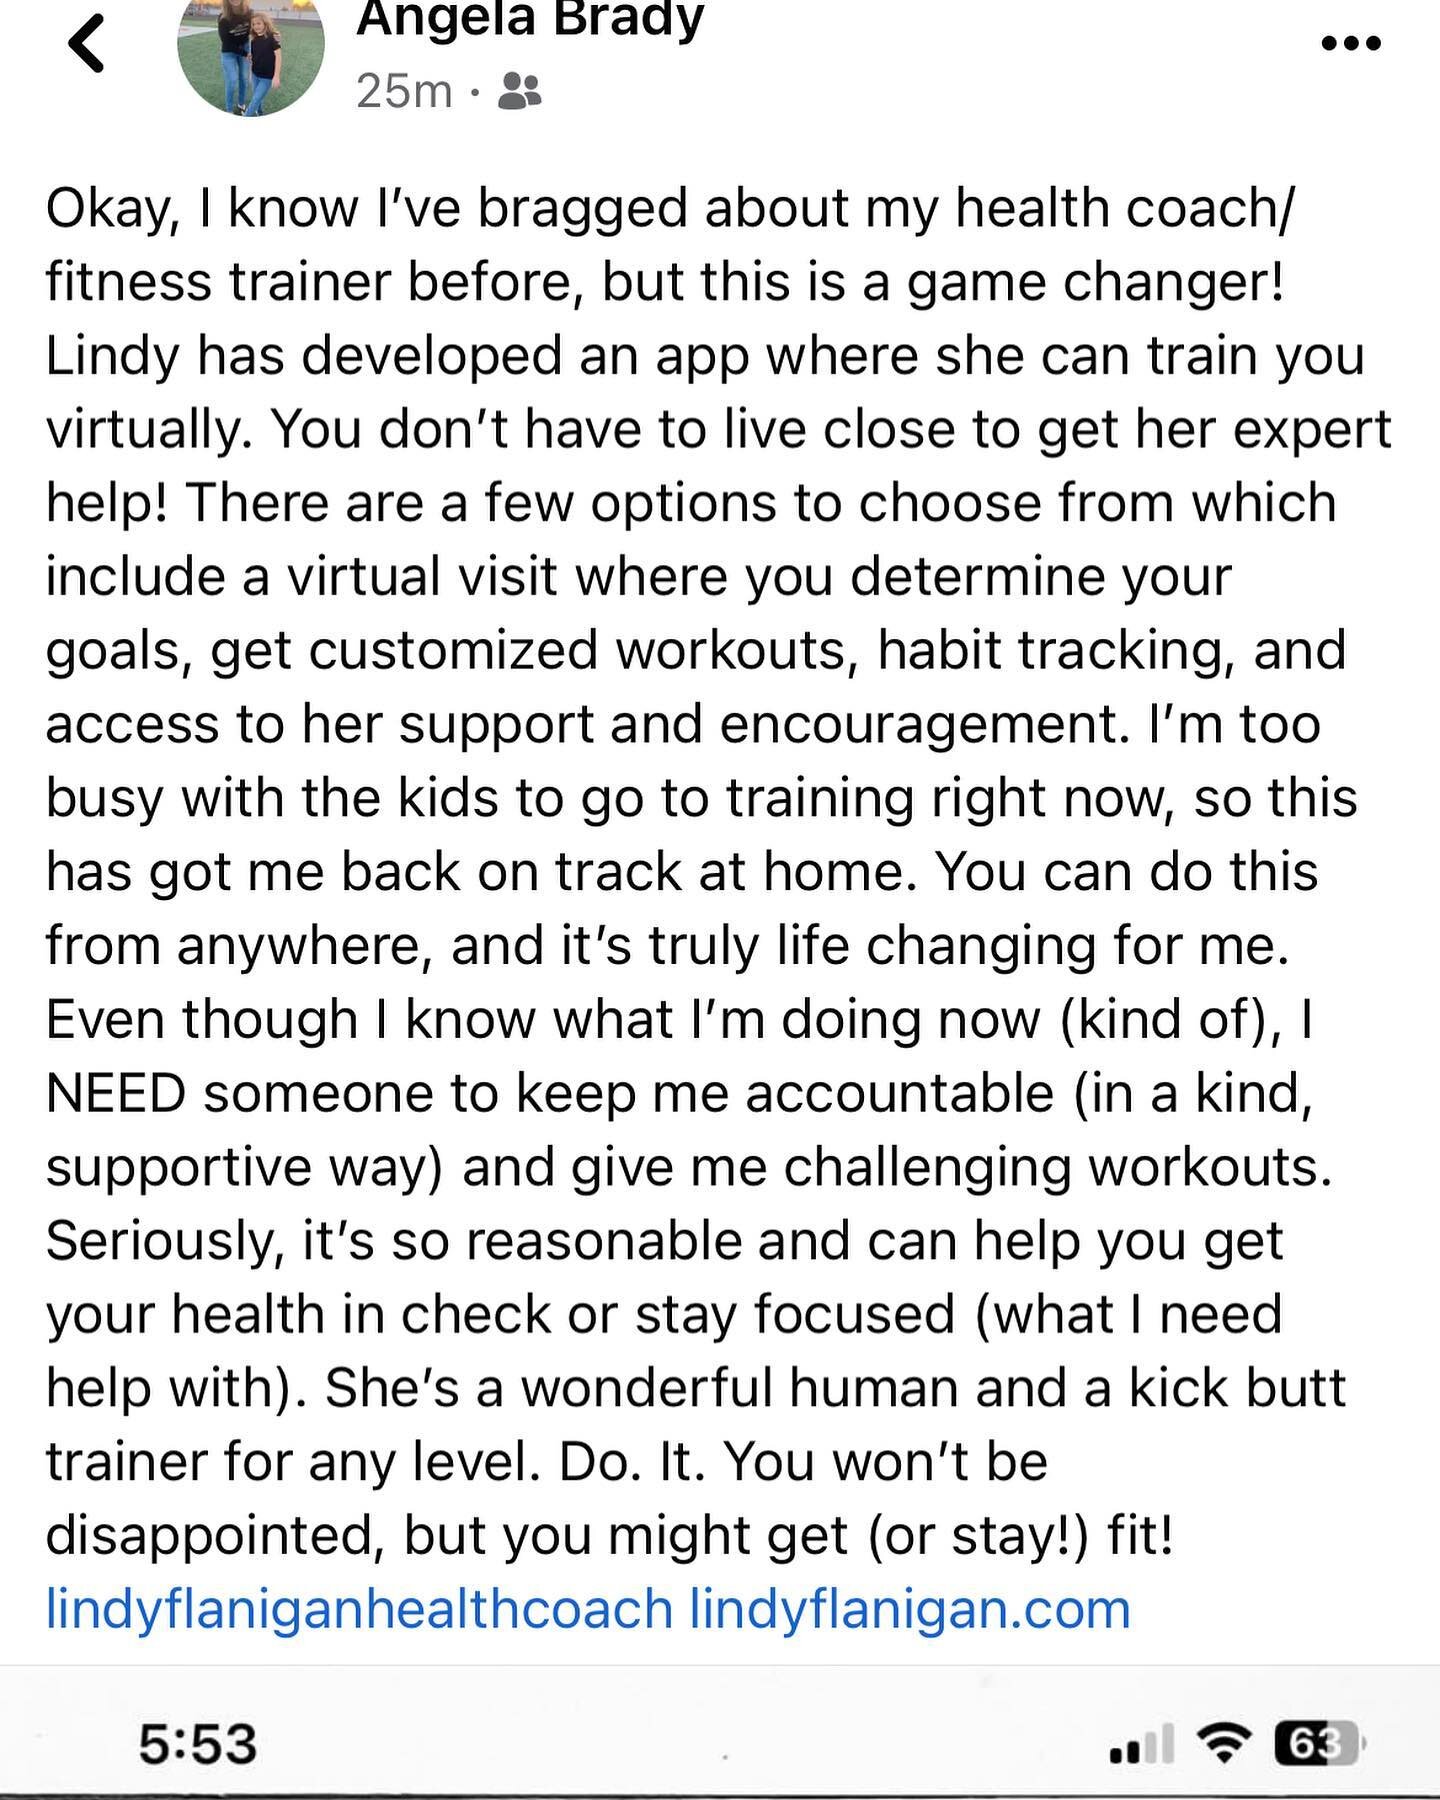 ❤️❤️Client testimonials are amazing&hellip;thank you Angela for this kind testimonial!! 

💥💥She signed up for my app a few days ago and already loves how it&rsquo;s pushing her, keeping her accountable and has got her moving!!! 

👉🏻Do you want to